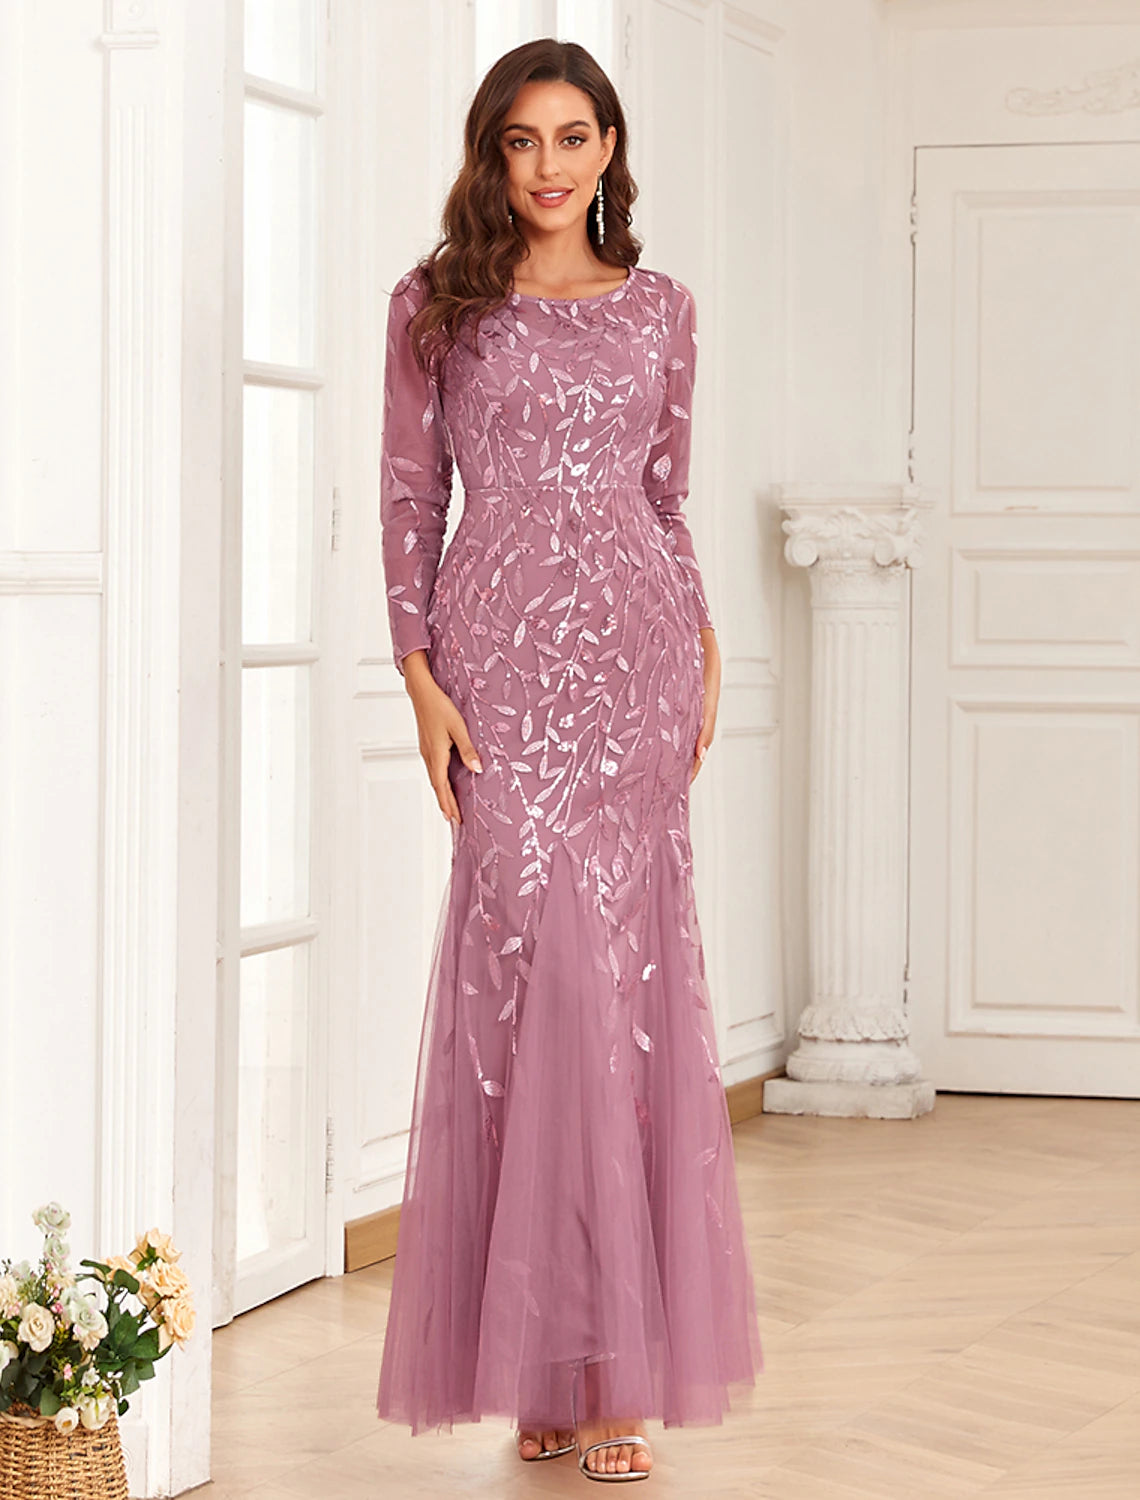 Mermaid / Trumpet Evening Gown Elegant Dress Prom Floor Length Long Sleeve Jewel Neck Tulle with Embroidery